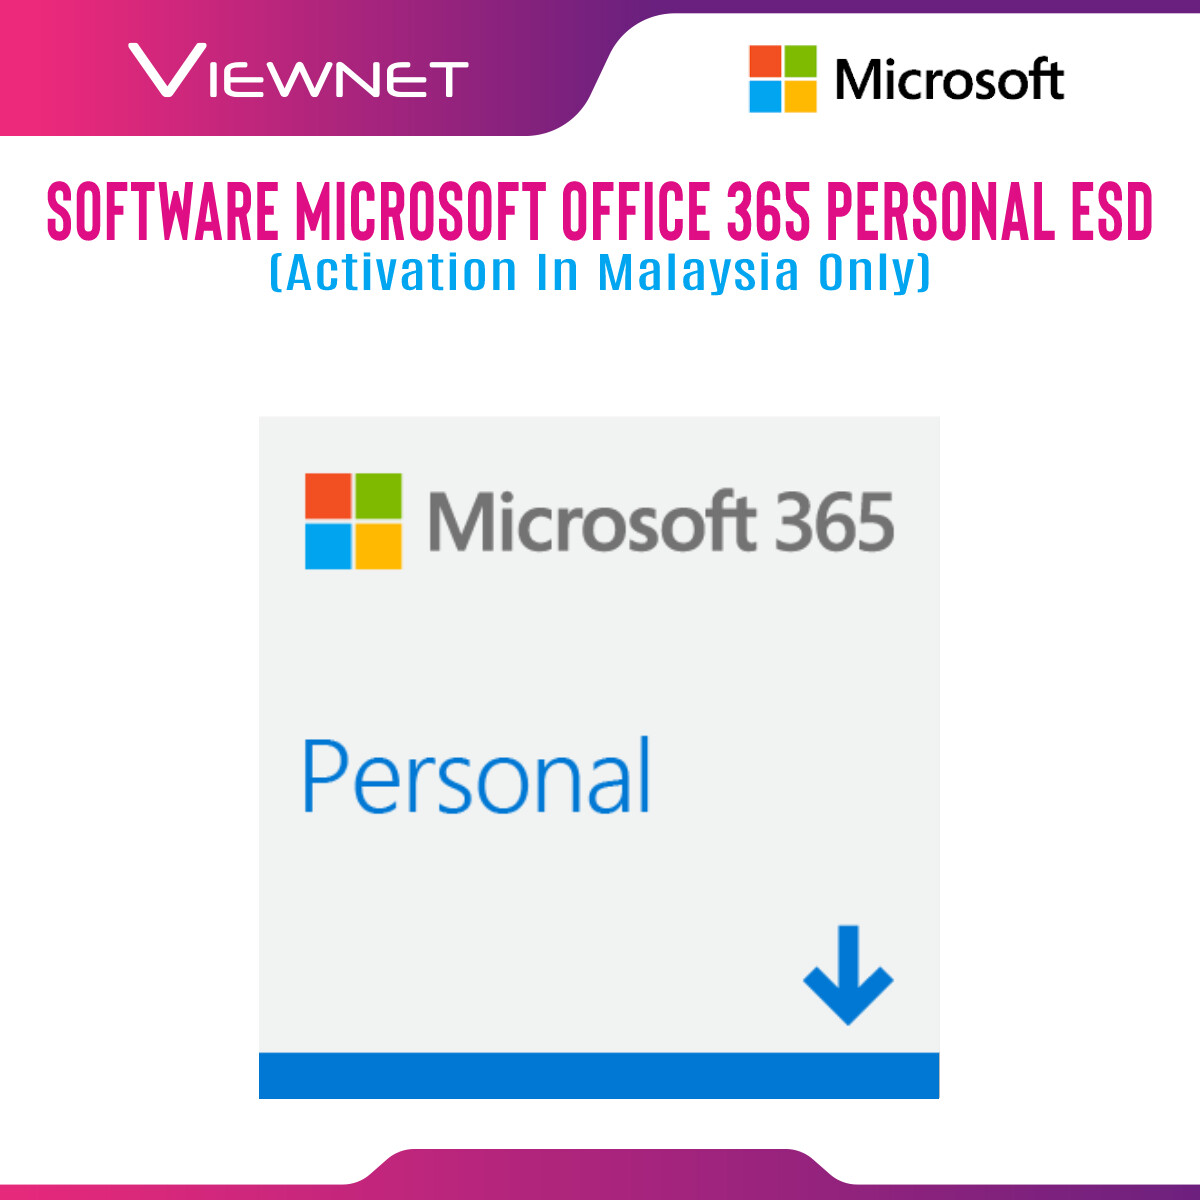 Microsoft 365 Personal  3 Months Free with purchase of PC Mac Tablet Smartphone or PC Accessory, Plus 12 Month Subscription, up to 5 Devices  Premium Office Apps  1TB OneDrive Cloud Storage  PC/Mac Download (Renews to 12 Month Subscription)